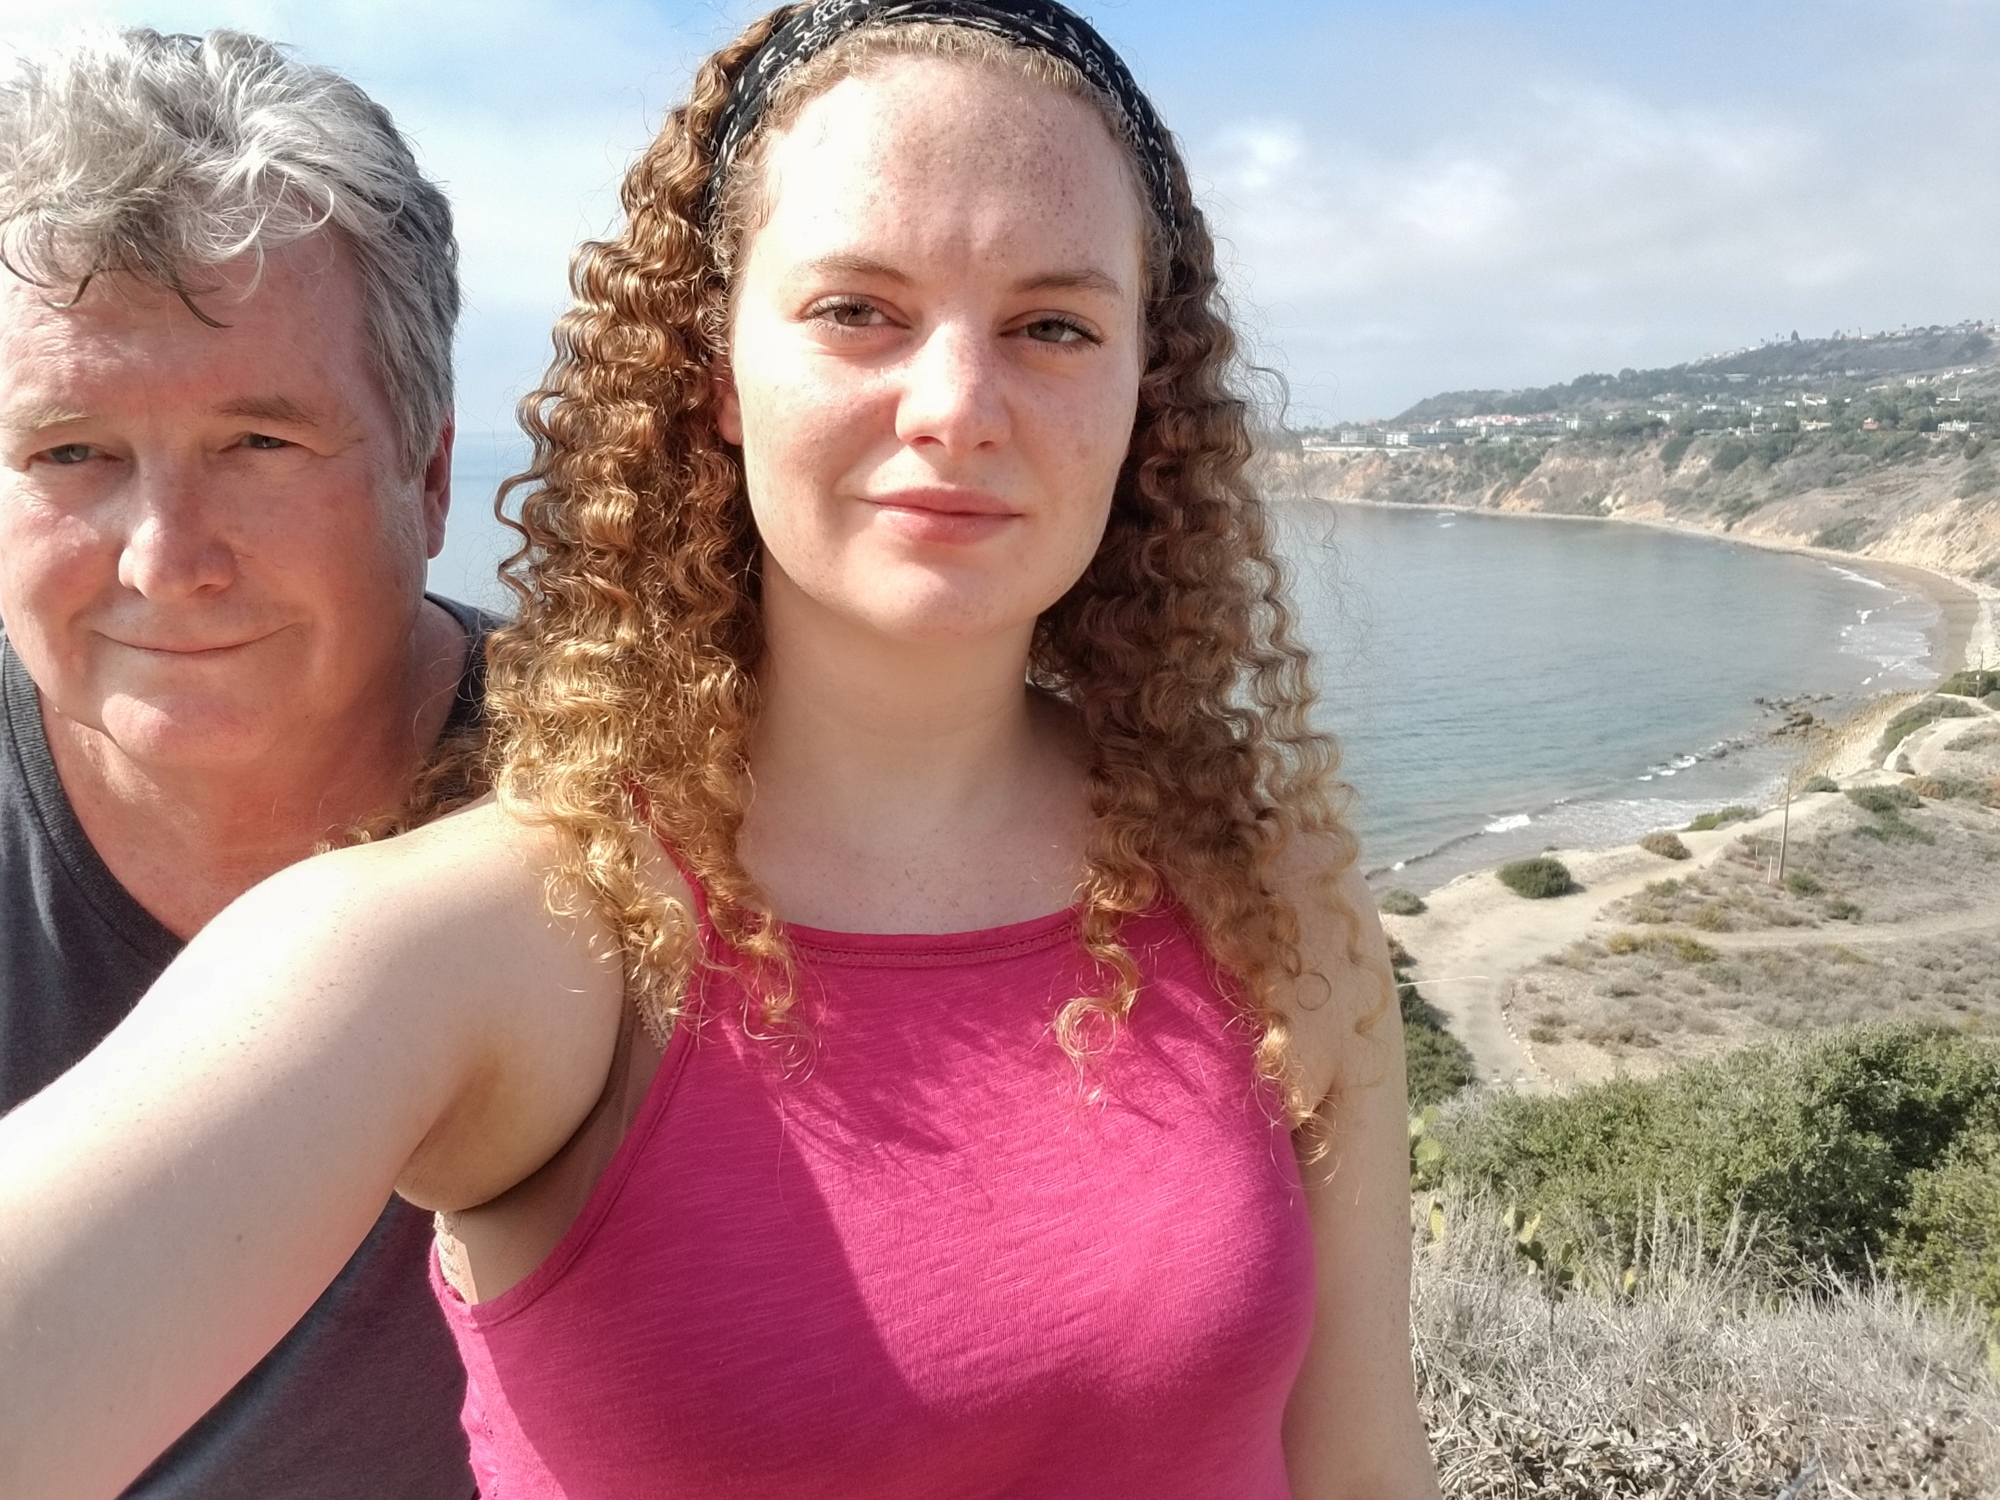 Selfie of a young woman with curly hair and her father with a sandy cove and ocean in the background.